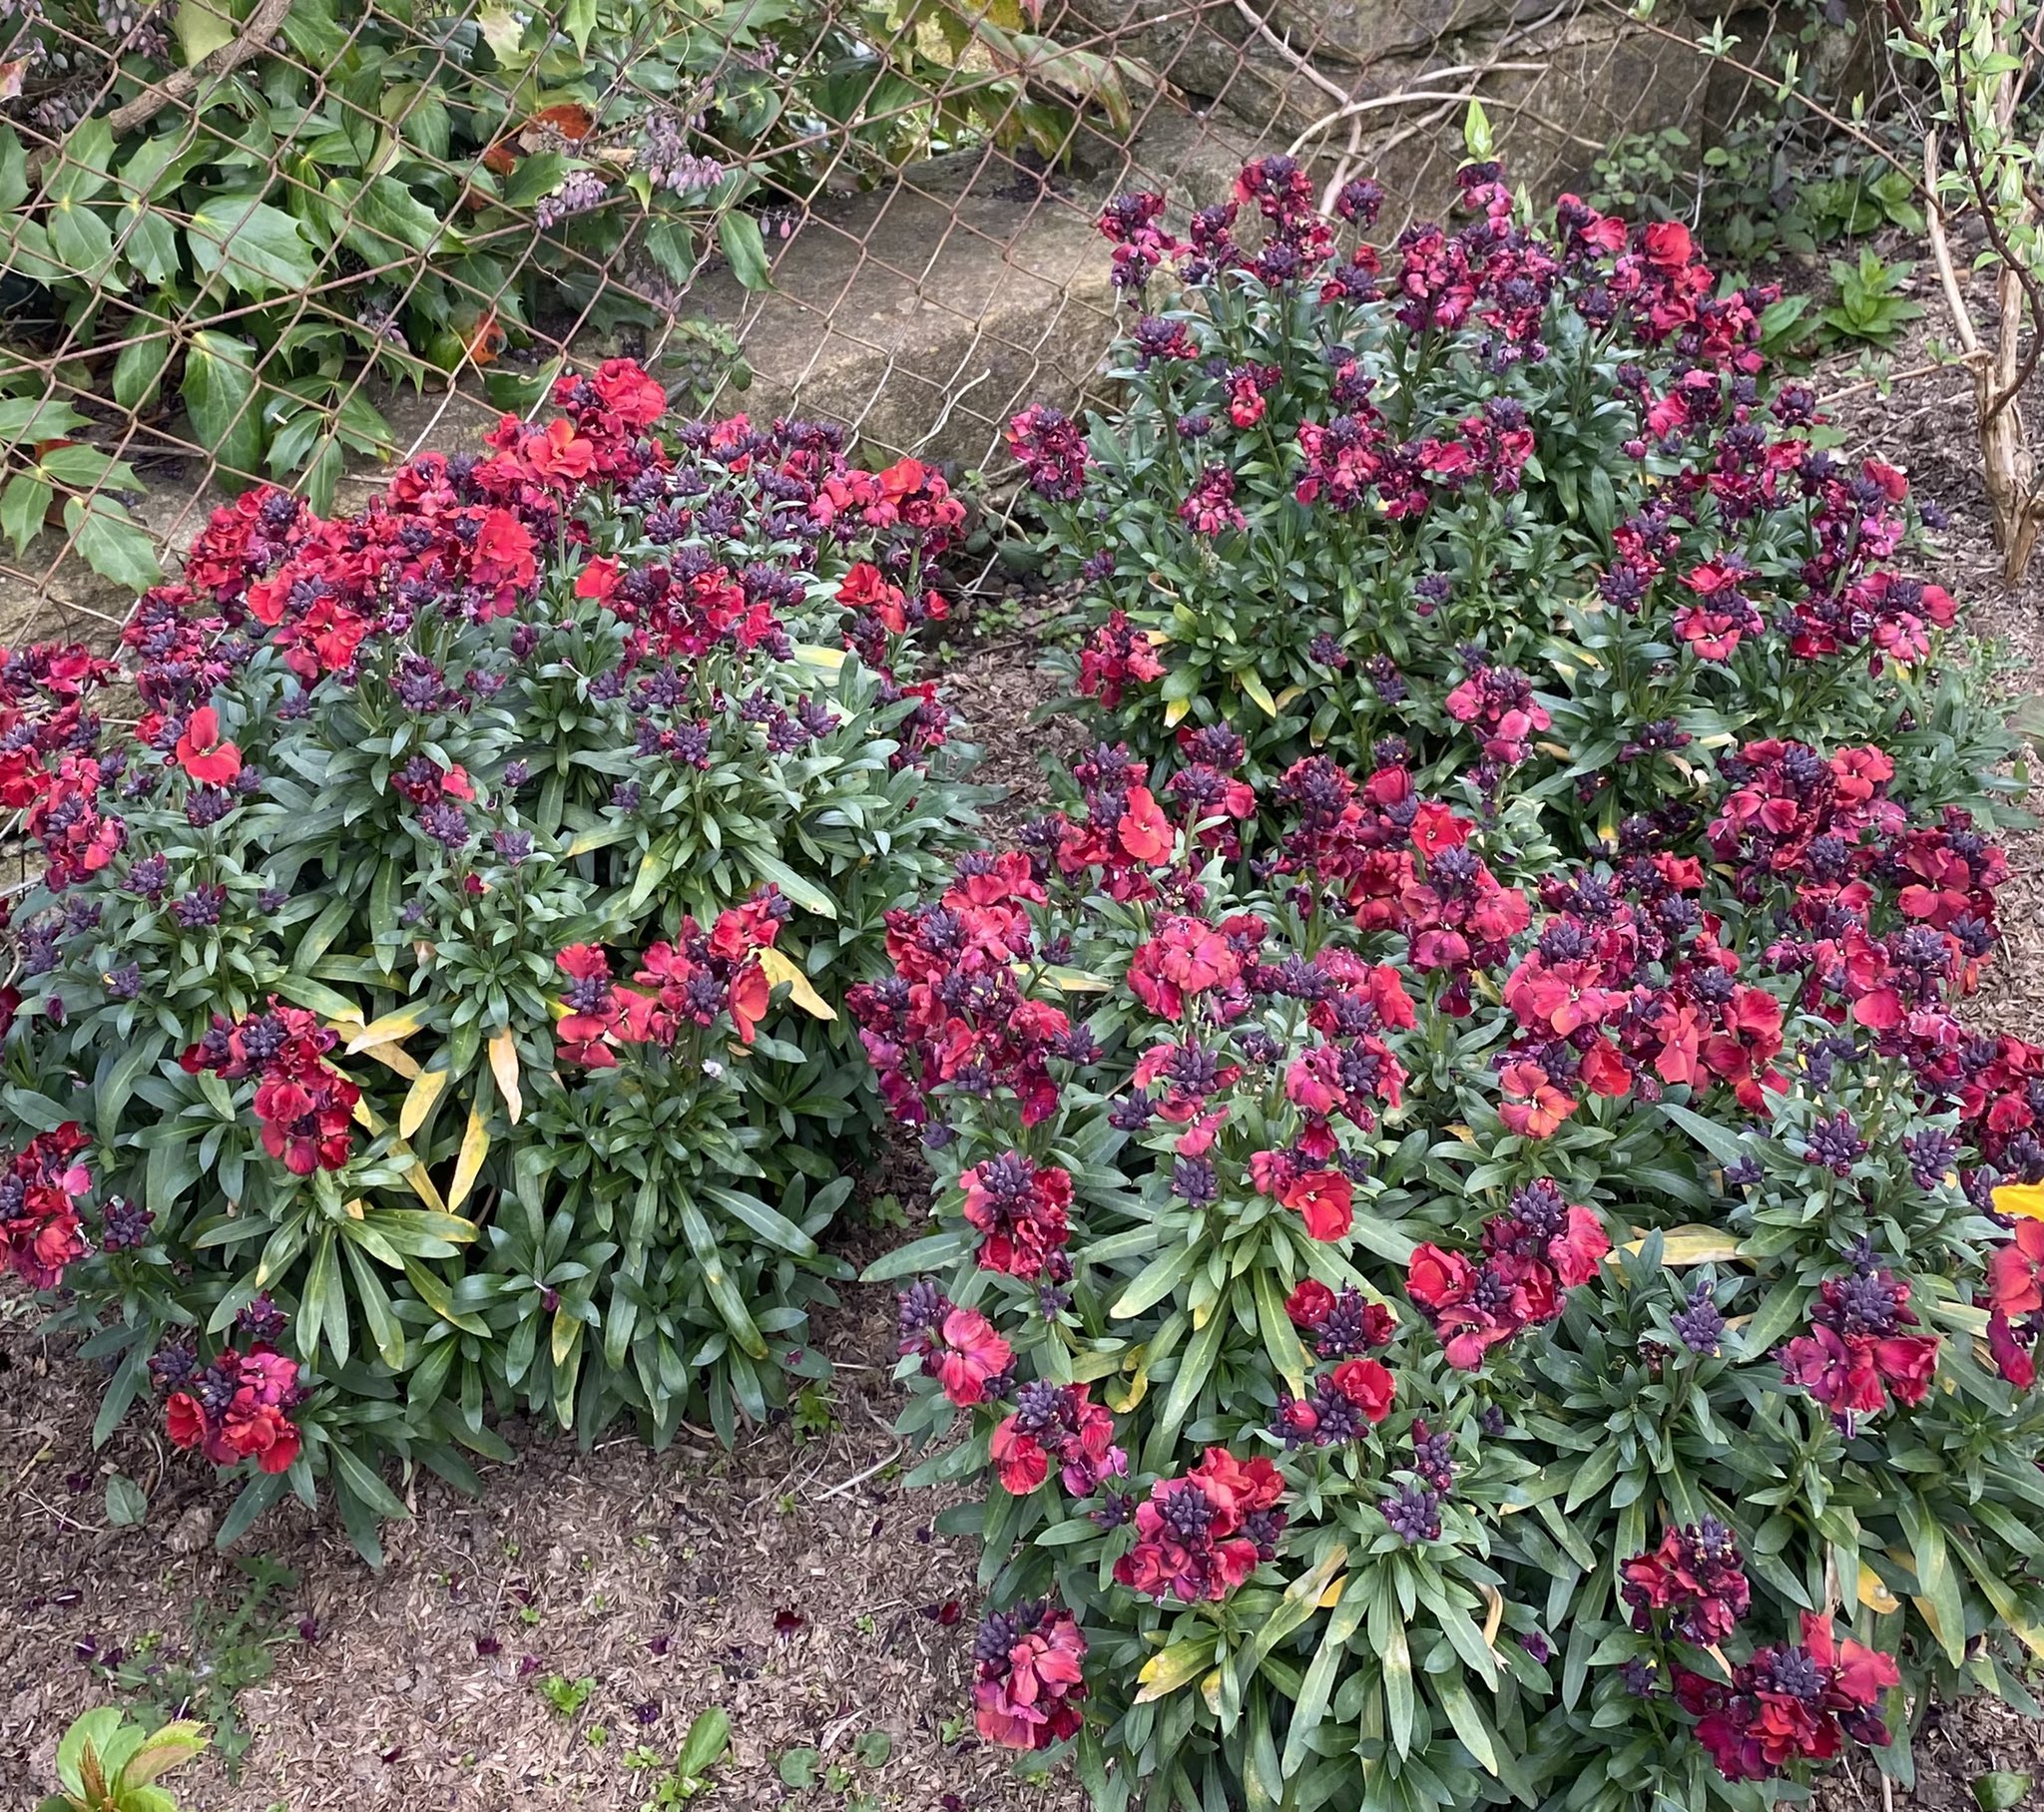 Alan E Down on Twitter: "Compact perennial #wallflower Erysimum Red Jep is a cut above the with rich red colour and strong #scent! #spring https://t.co/9lakcUIpon" / Twitter